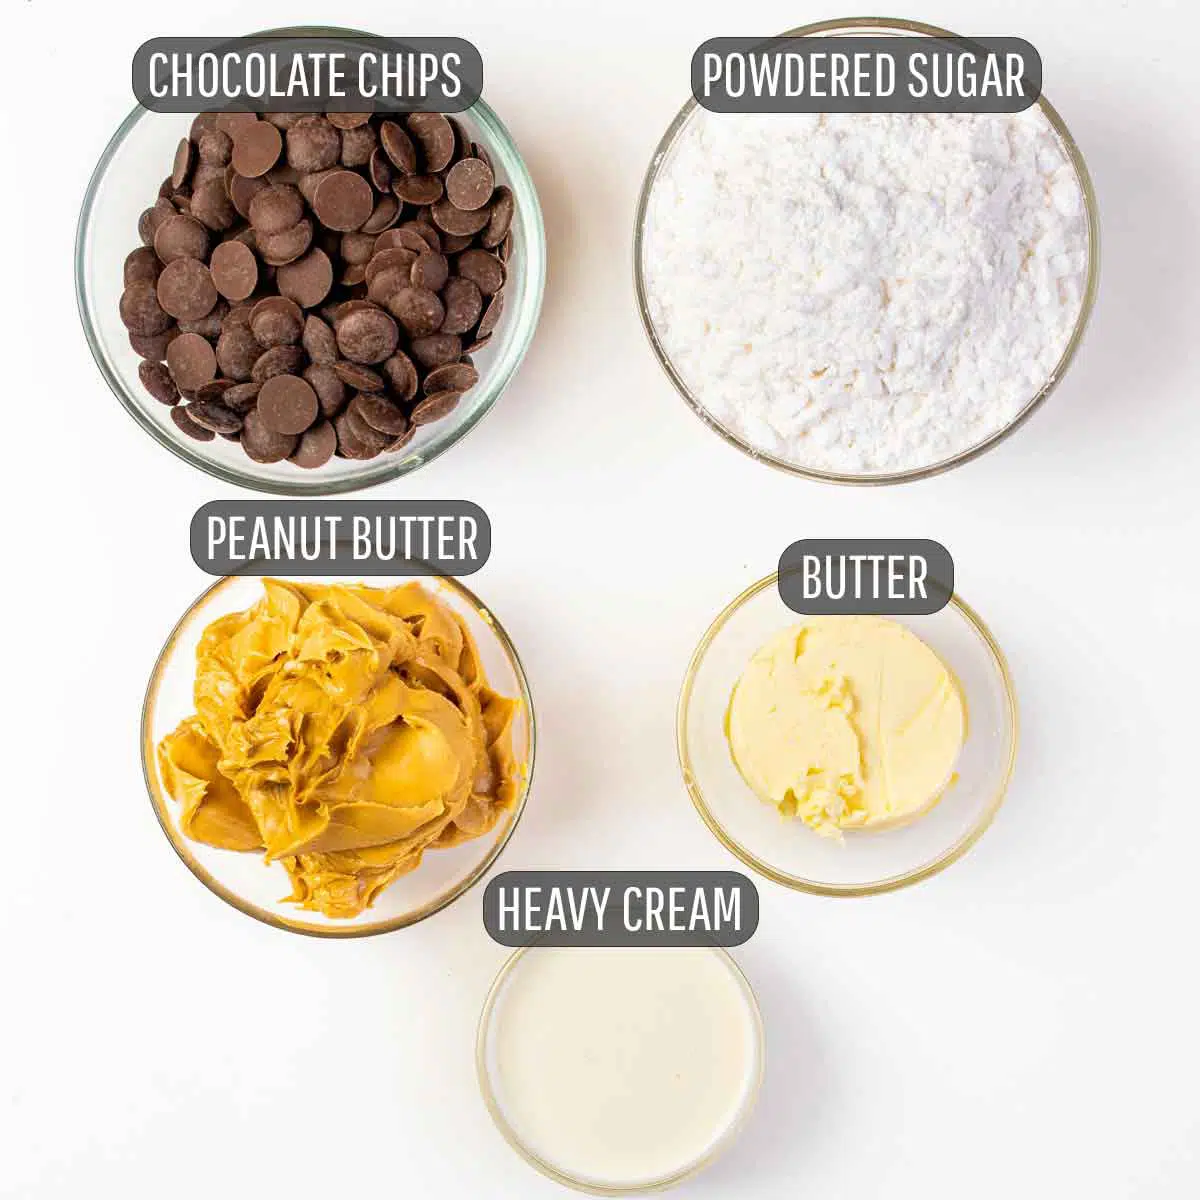 ingredients needed for the peanut butter and chocolate layer for peanut butter brownies.